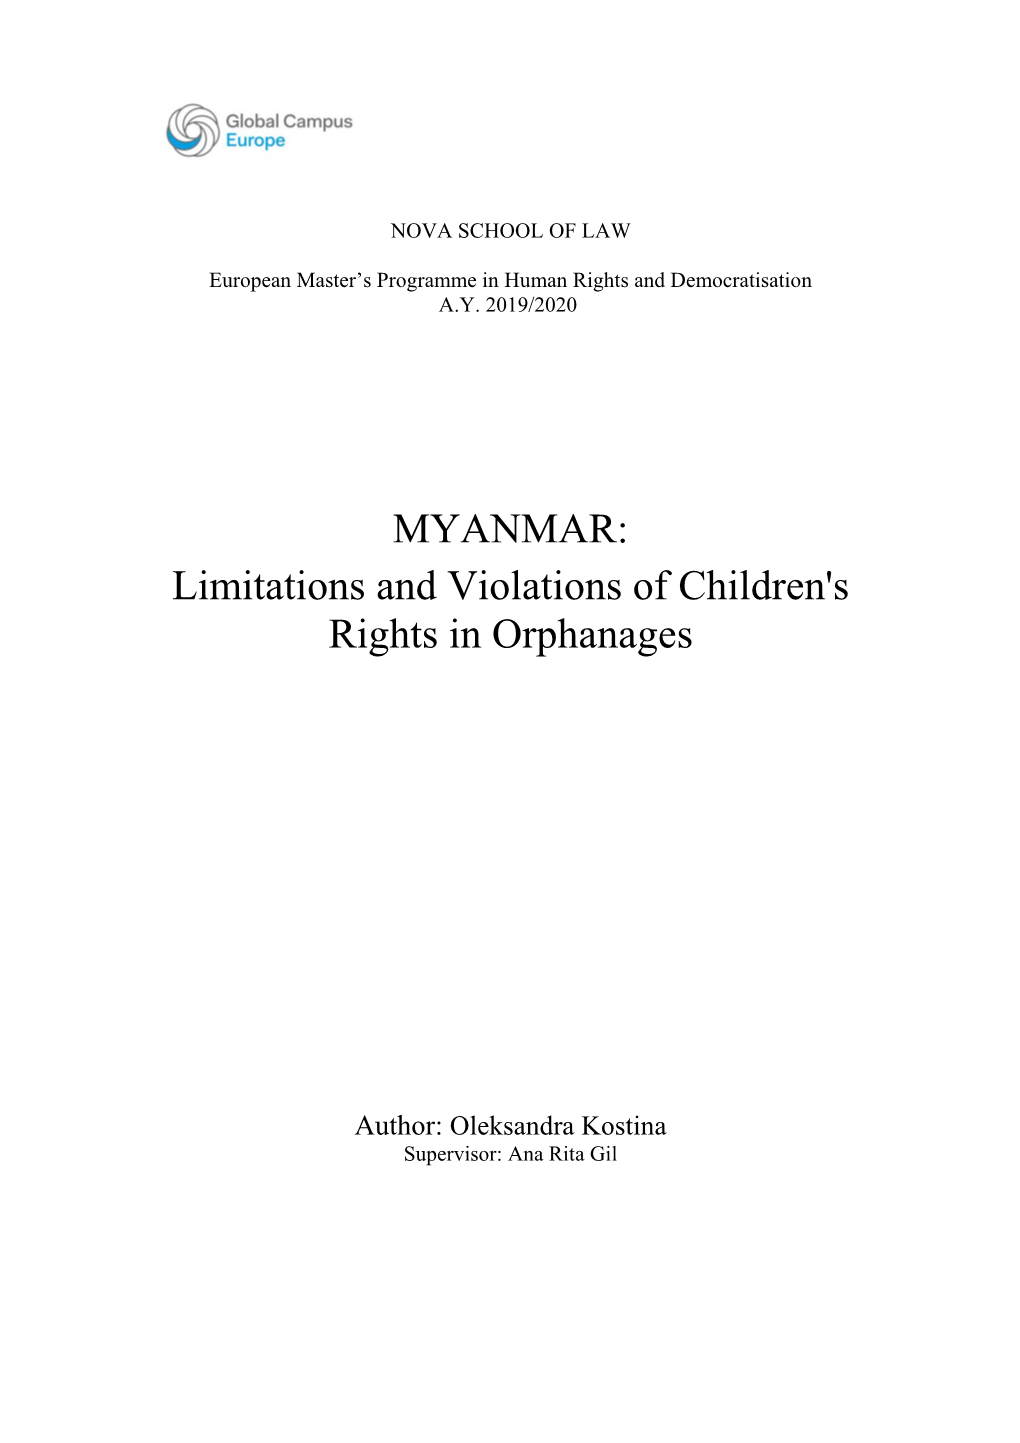 MYANMAR: Limitations and Violations of Children's Rights in Orphanages